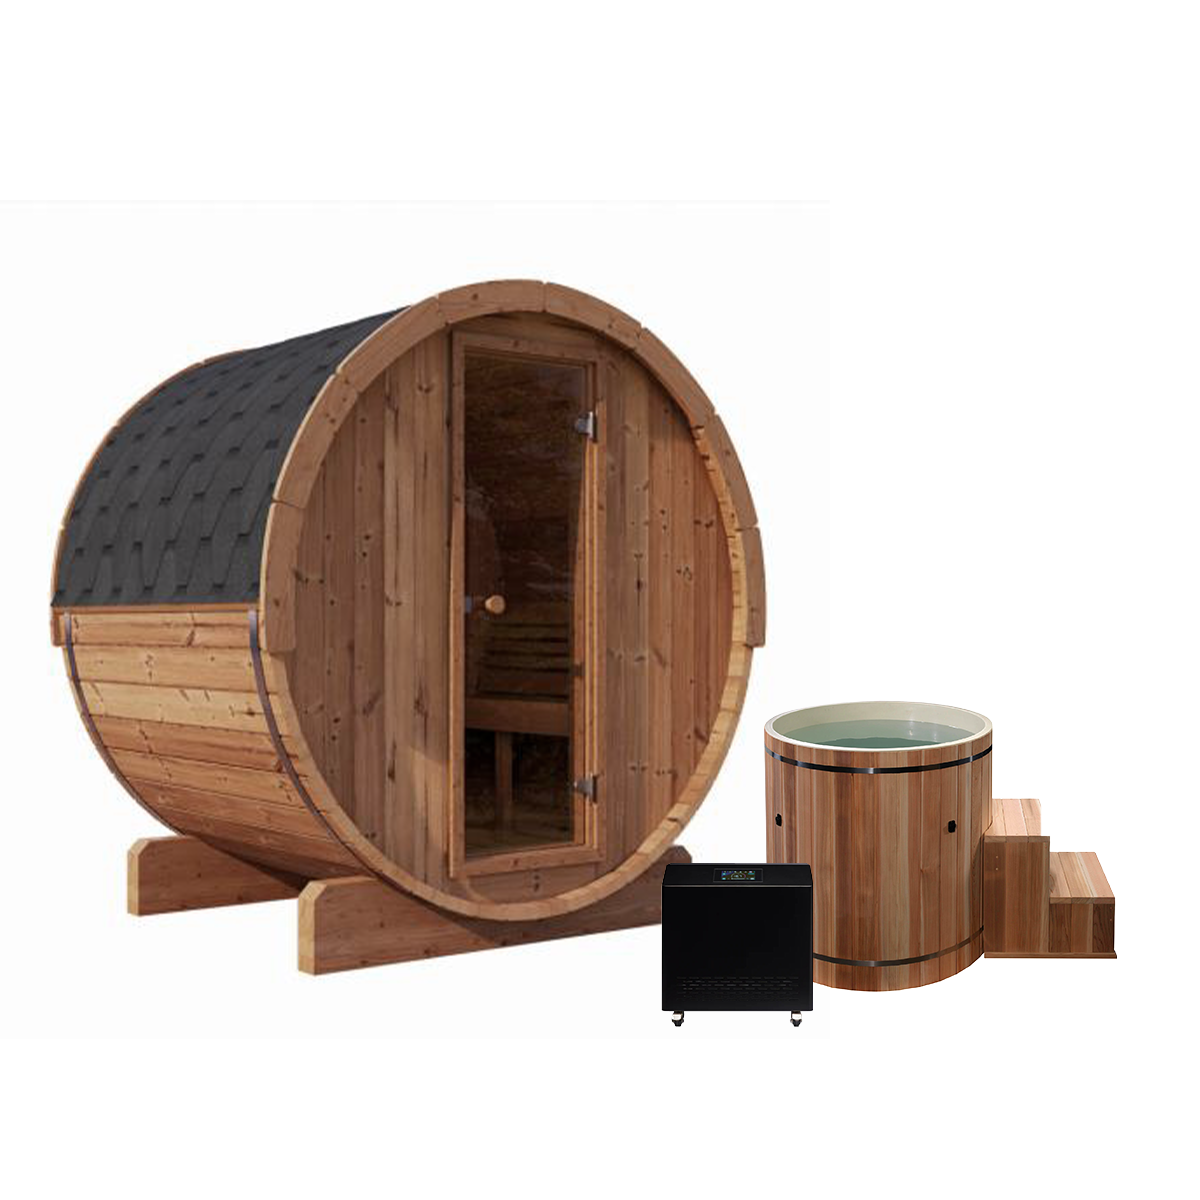 Forever  Saunas 4 person Thermally Treated Outdoor Barrel Sauna Detox Package